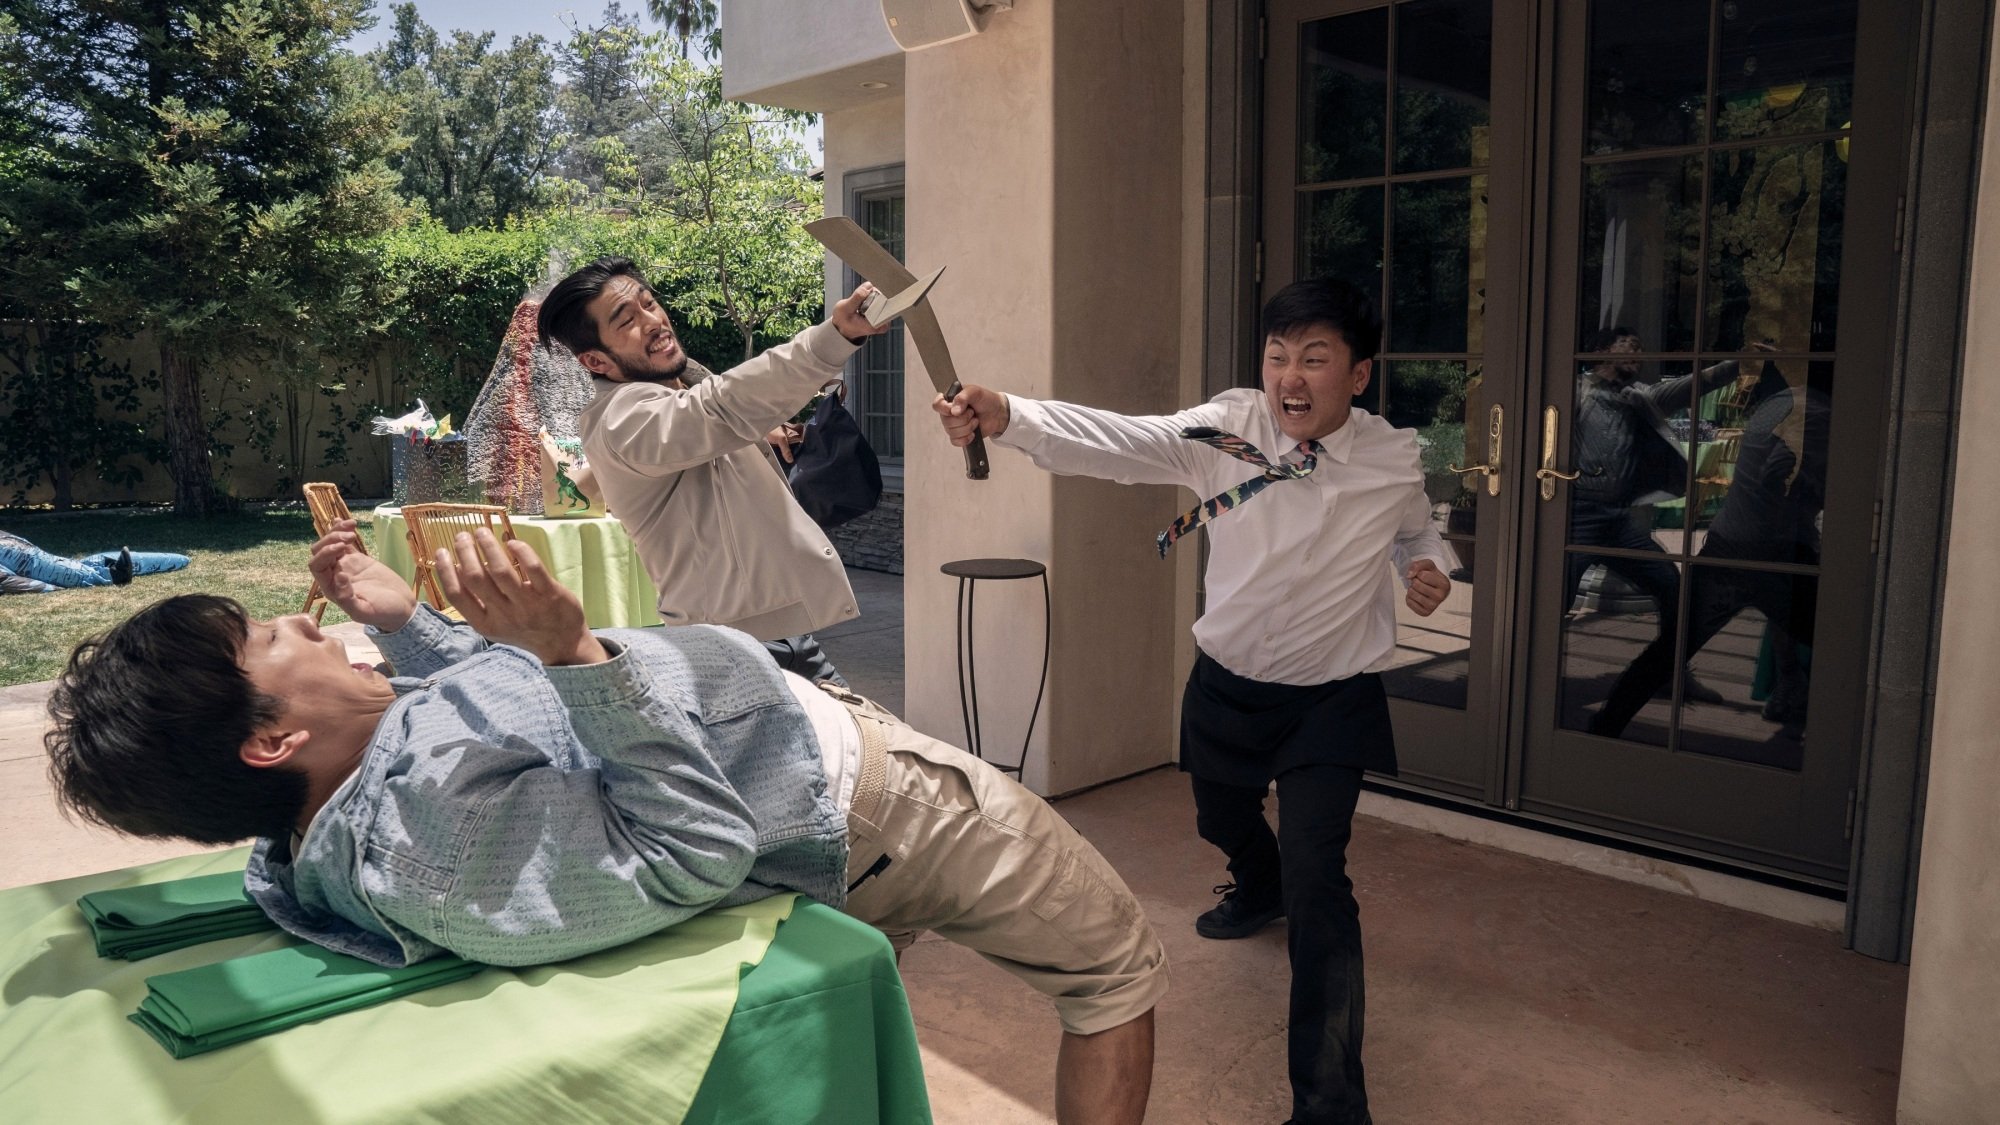 Two men fight with knives over a cowering man lying on a patio table.